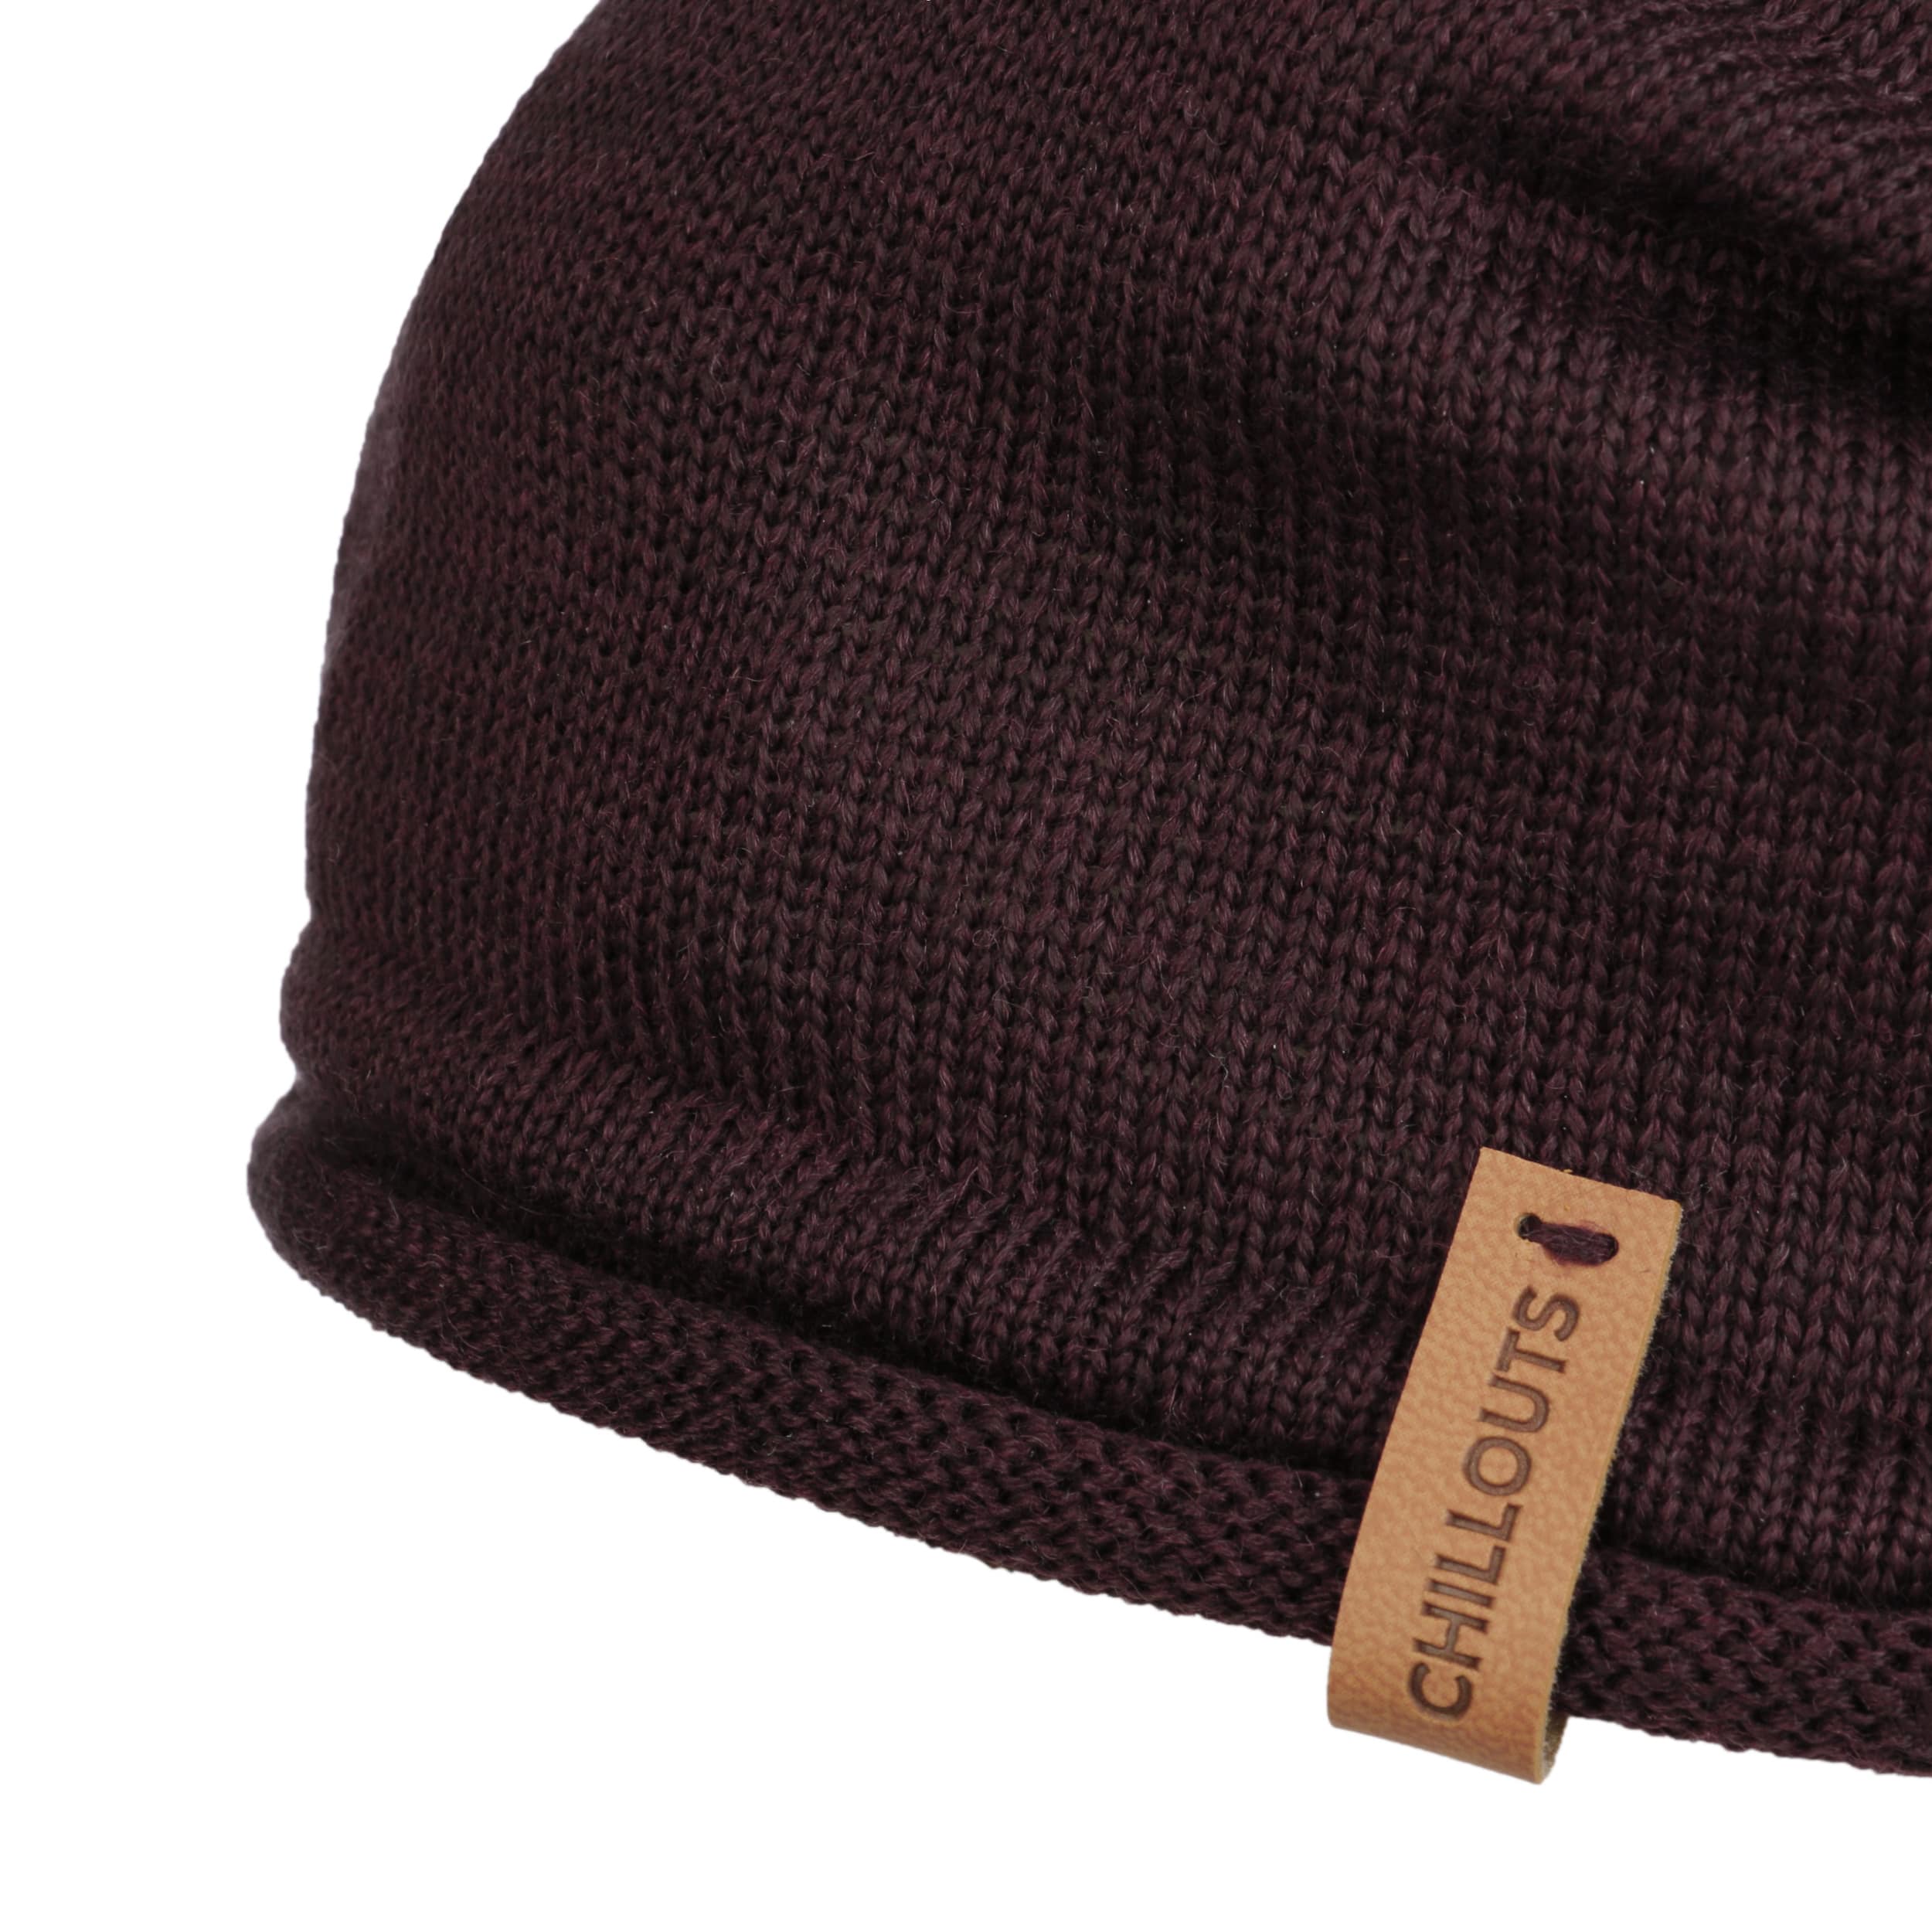 Berretto Beanie Leicester by Chillouts - 27,99 €